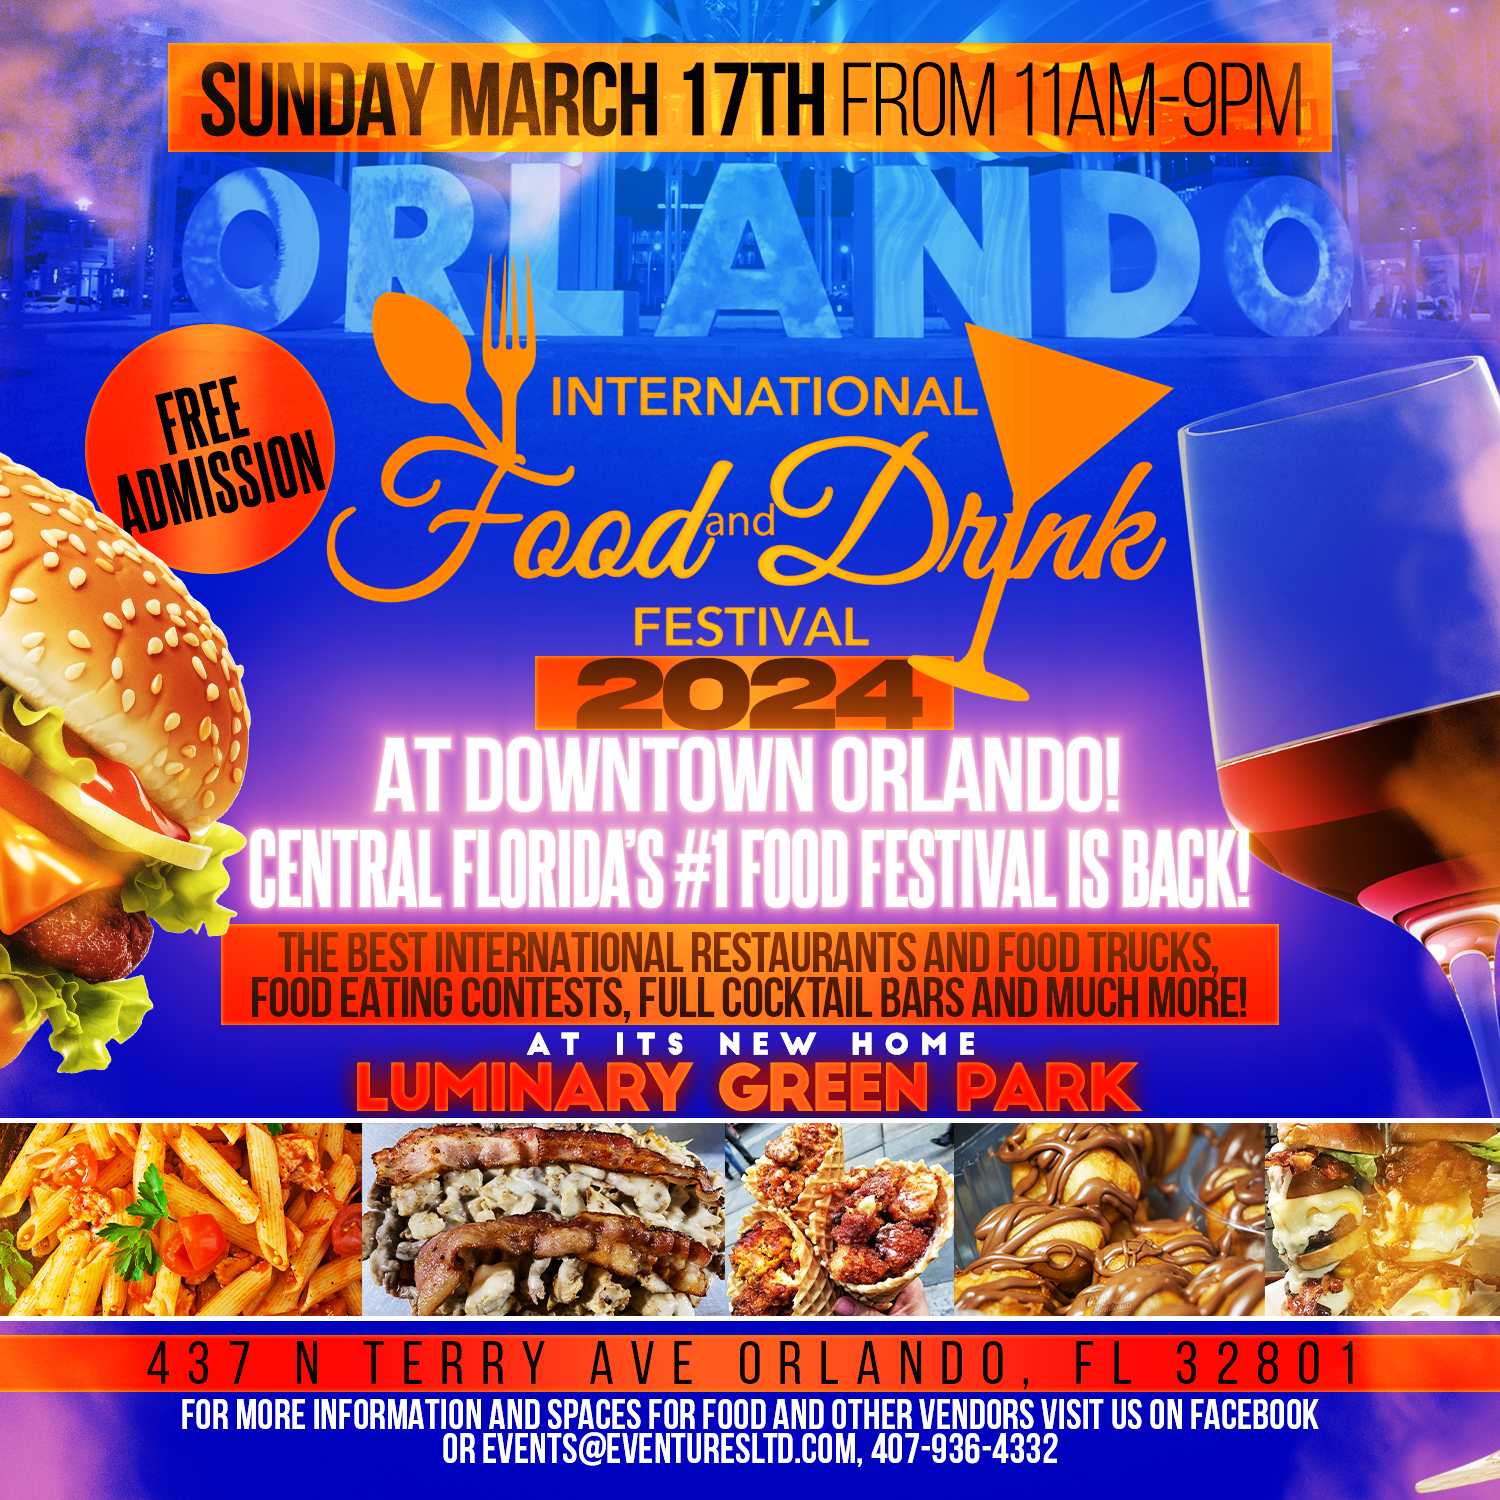 The International Food and Drink Festival at Downtown Orlando